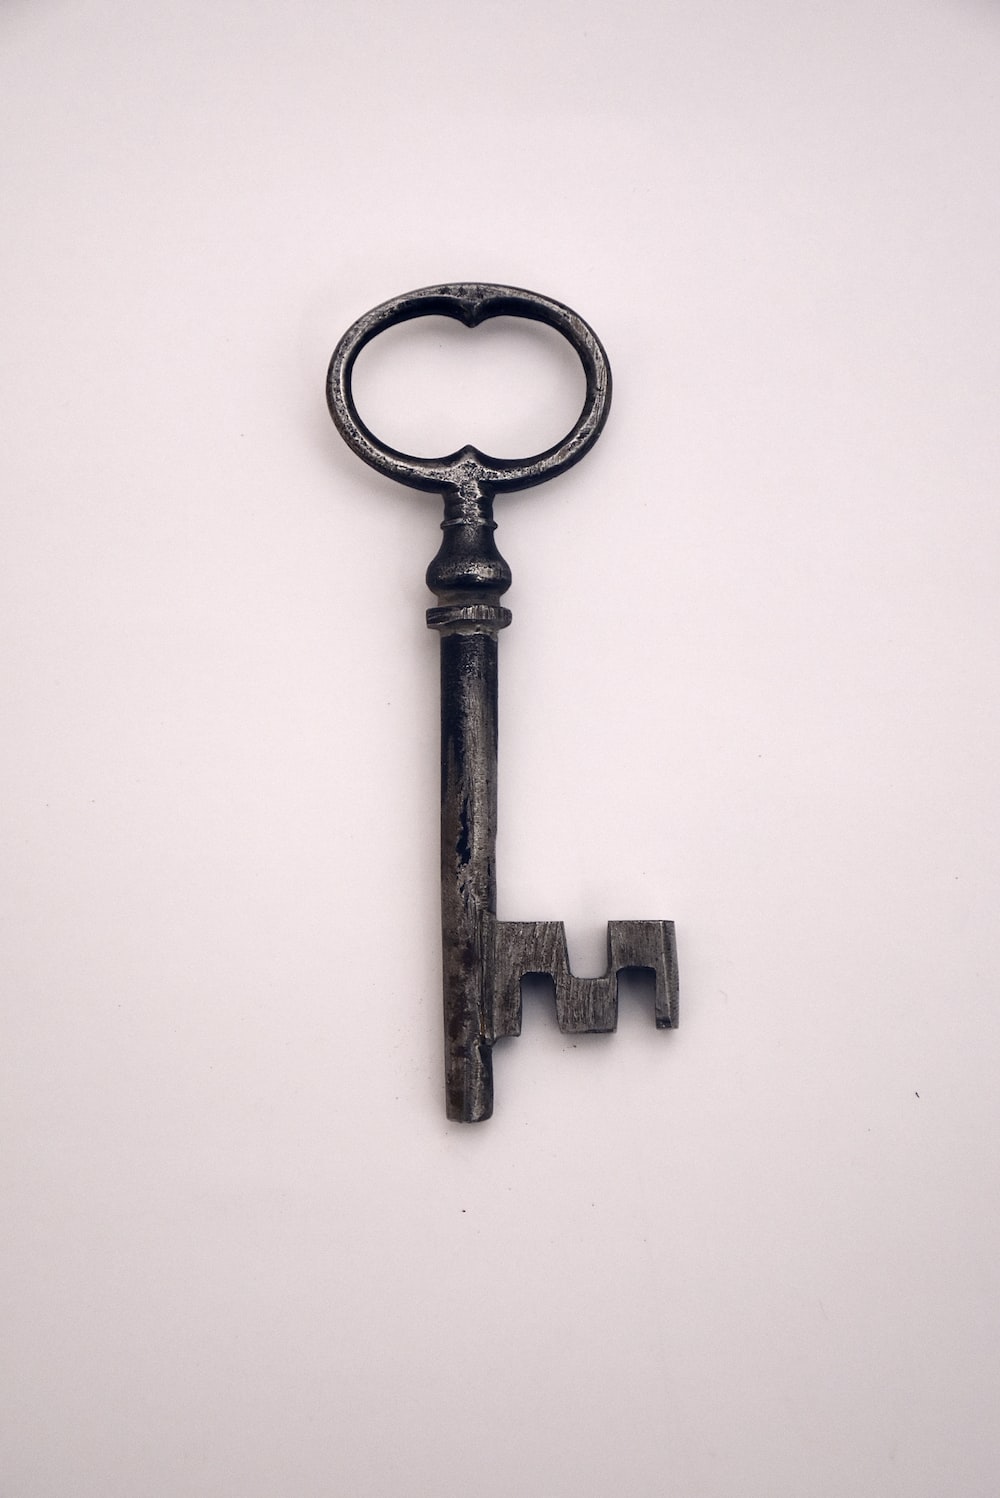 What is a key in knob lock?